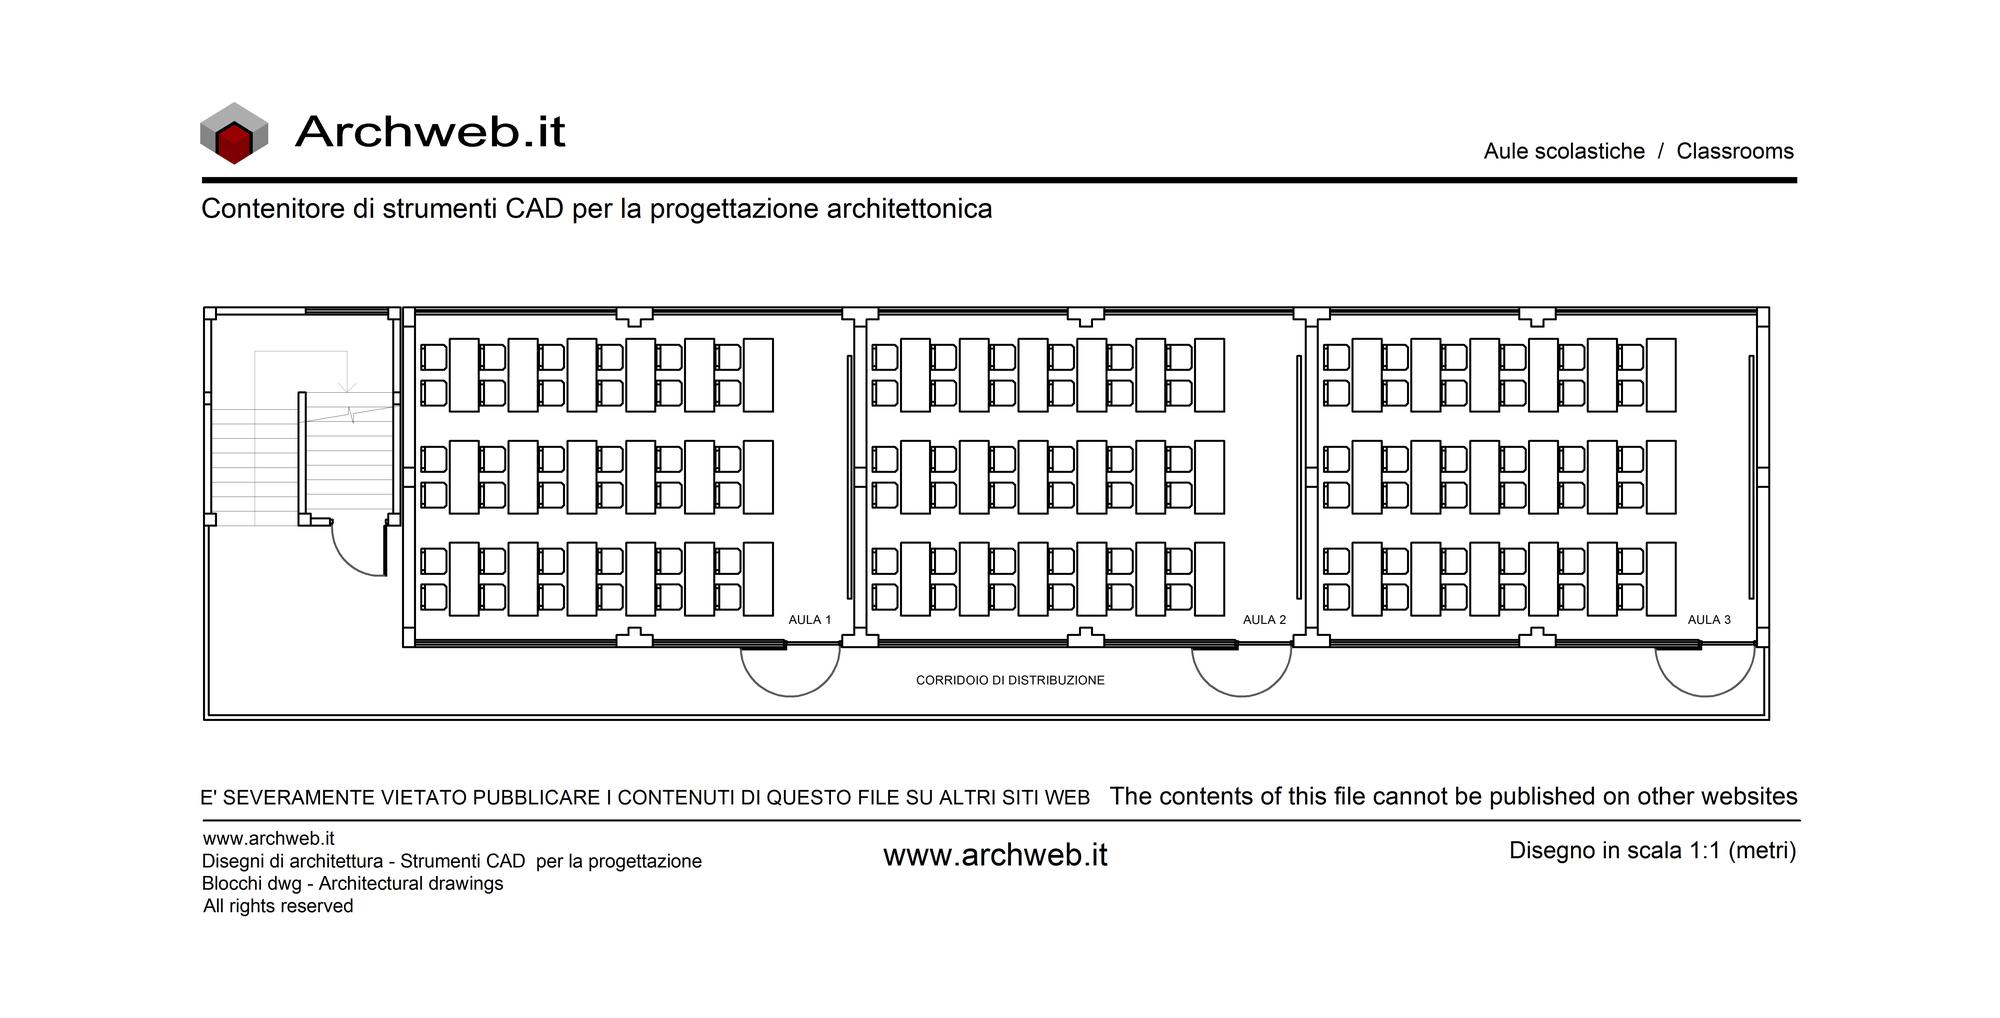 Plan classrooms 03- 1:100 scale dwg drawing - Archweb